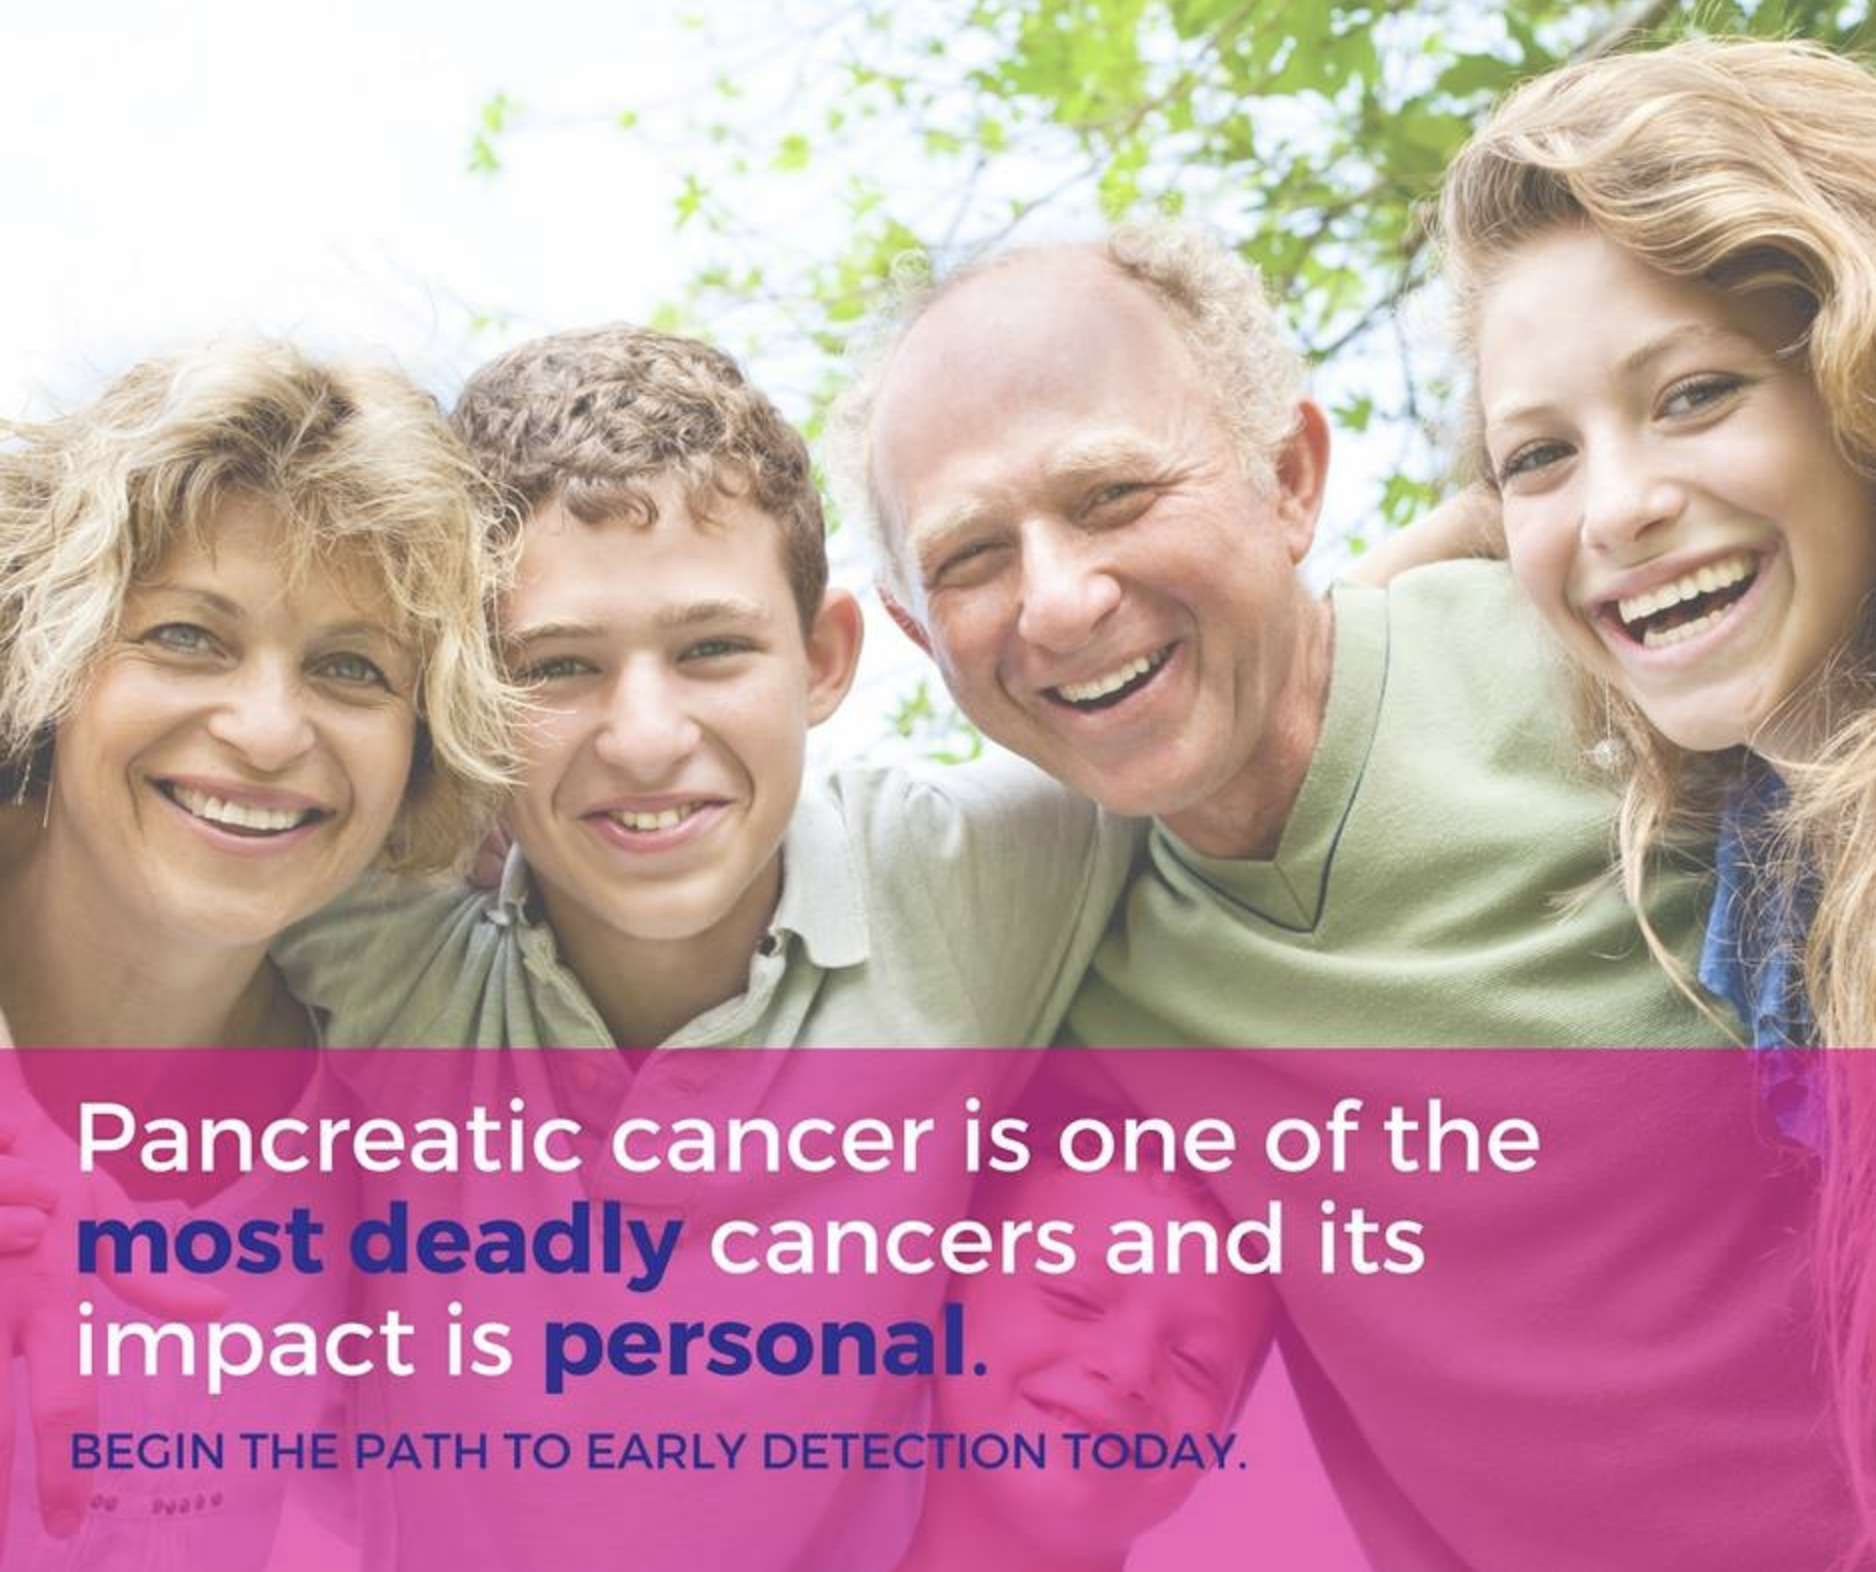 Pancreatic cancer is one of the most deadly cancers and its impact is personal. Begin the path to early detection today! 